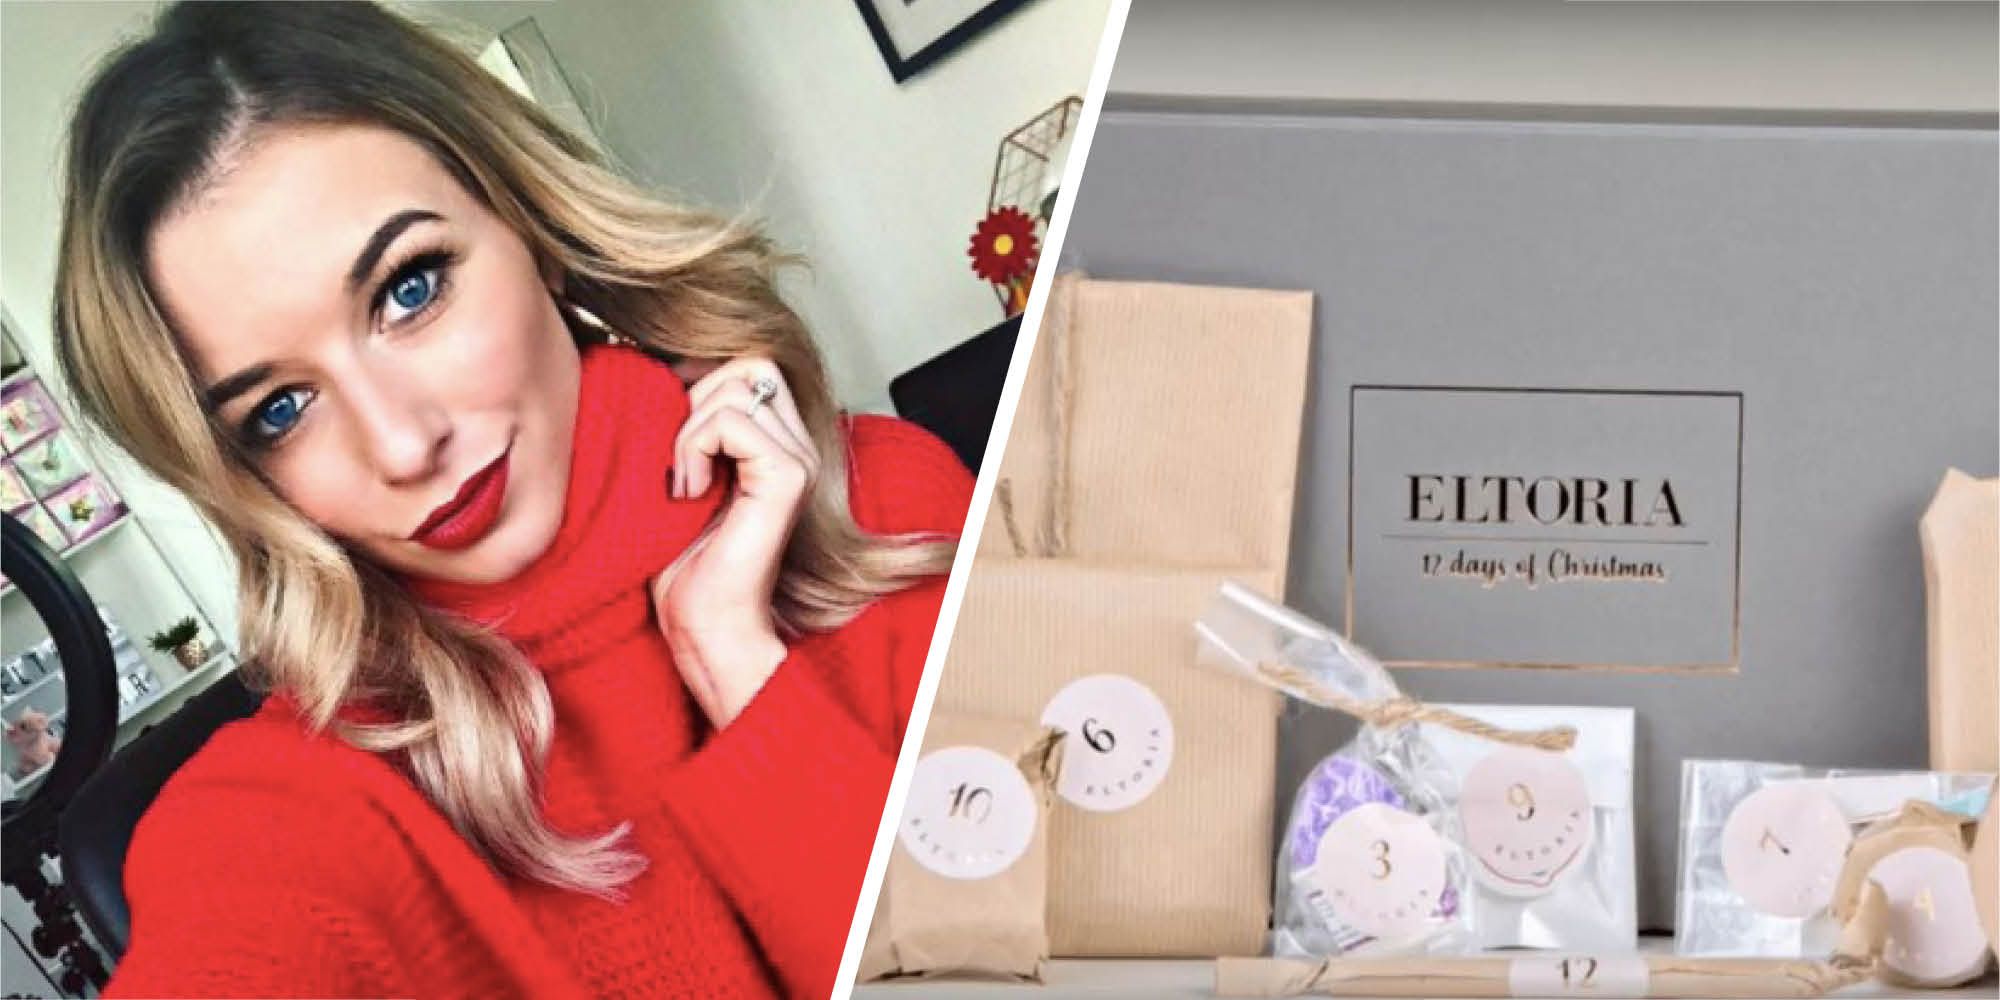 Eltoria Advent Calendar This YouTuber Has Been Accused Of Selling